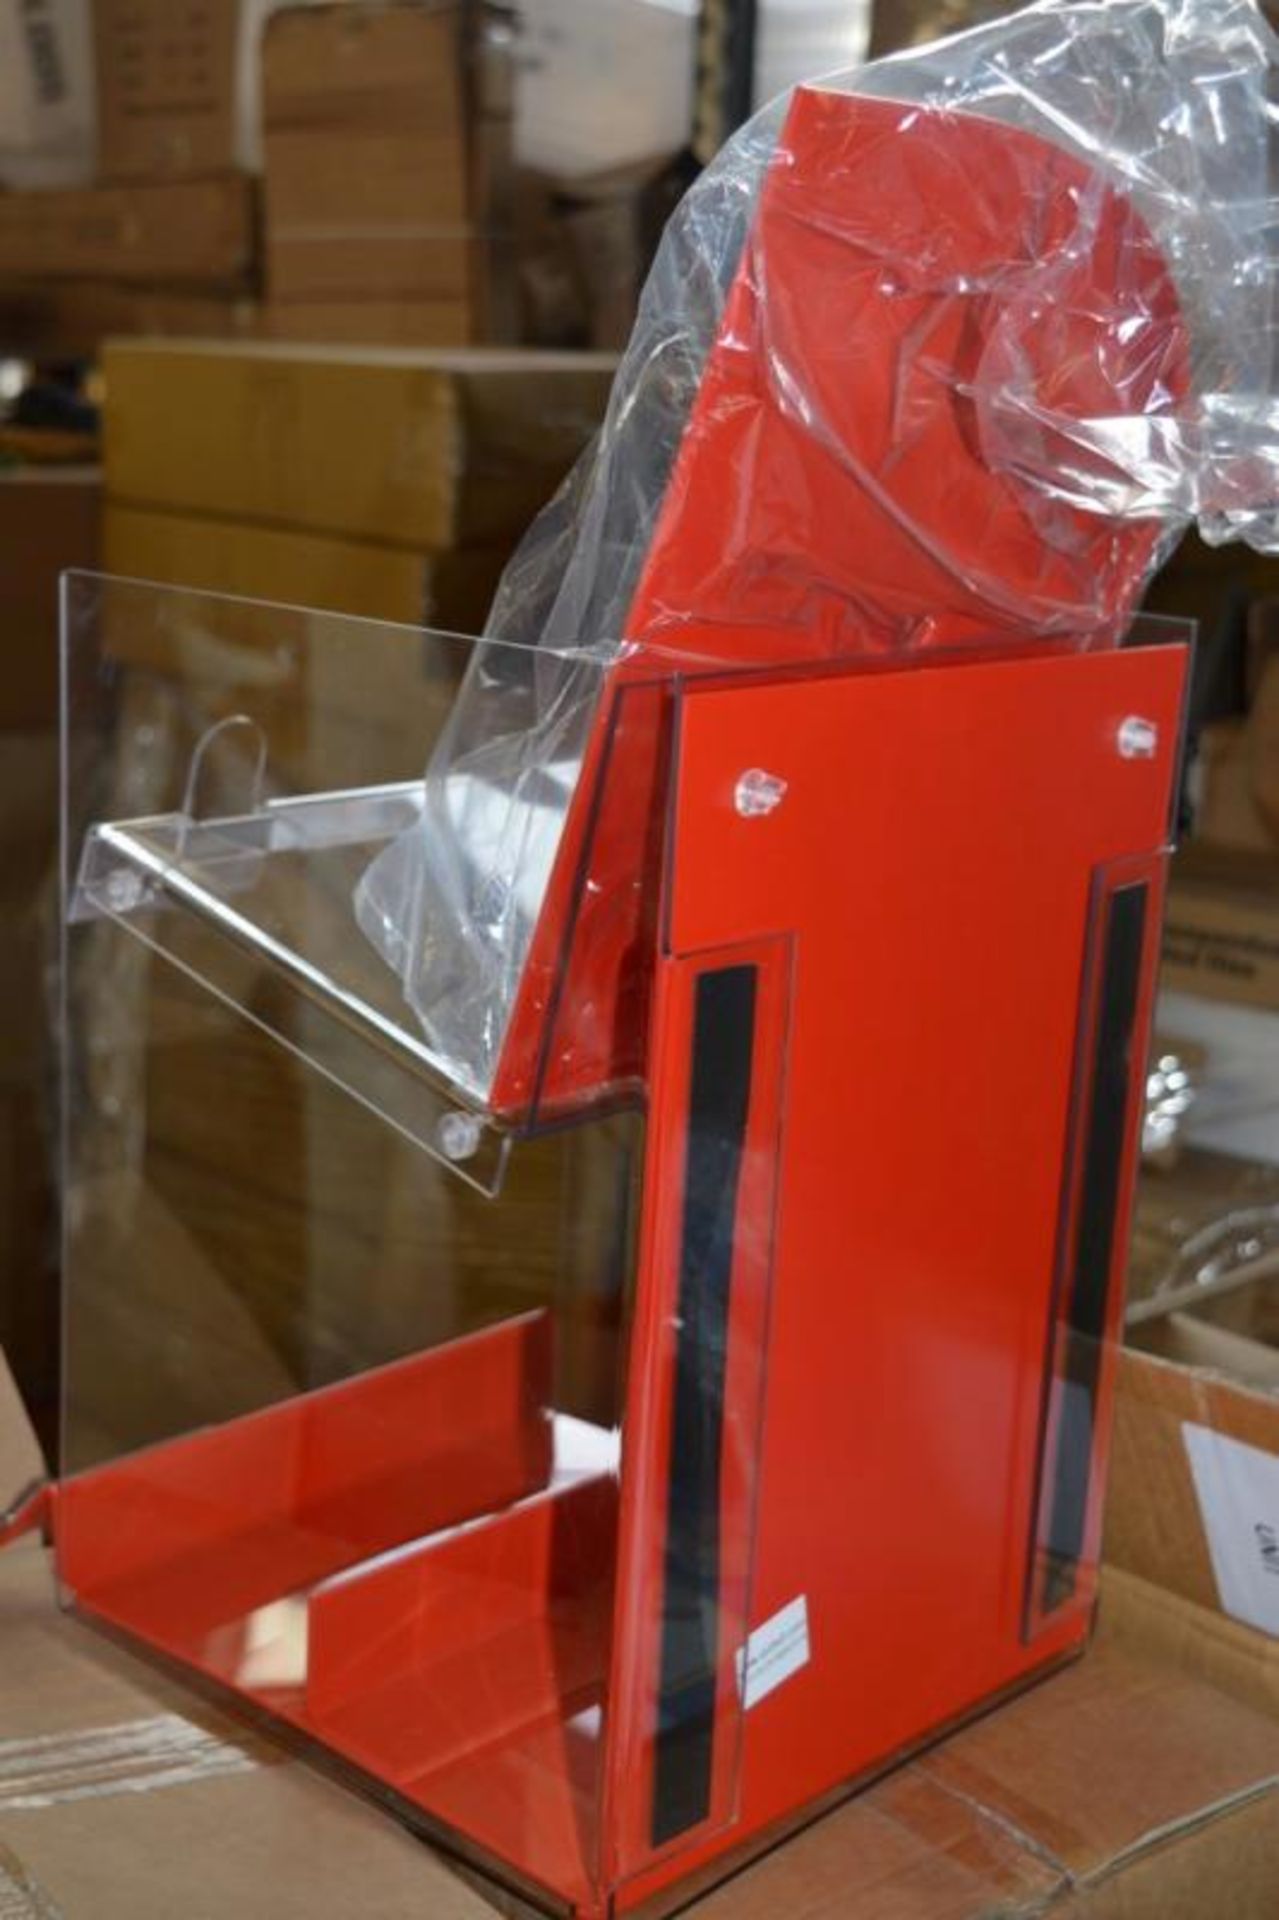 6 x Rexel Desktop Retail Display Units - Red and Clear Perspex - Qube3 Retail Innovation - New and B - Image 3 of 7